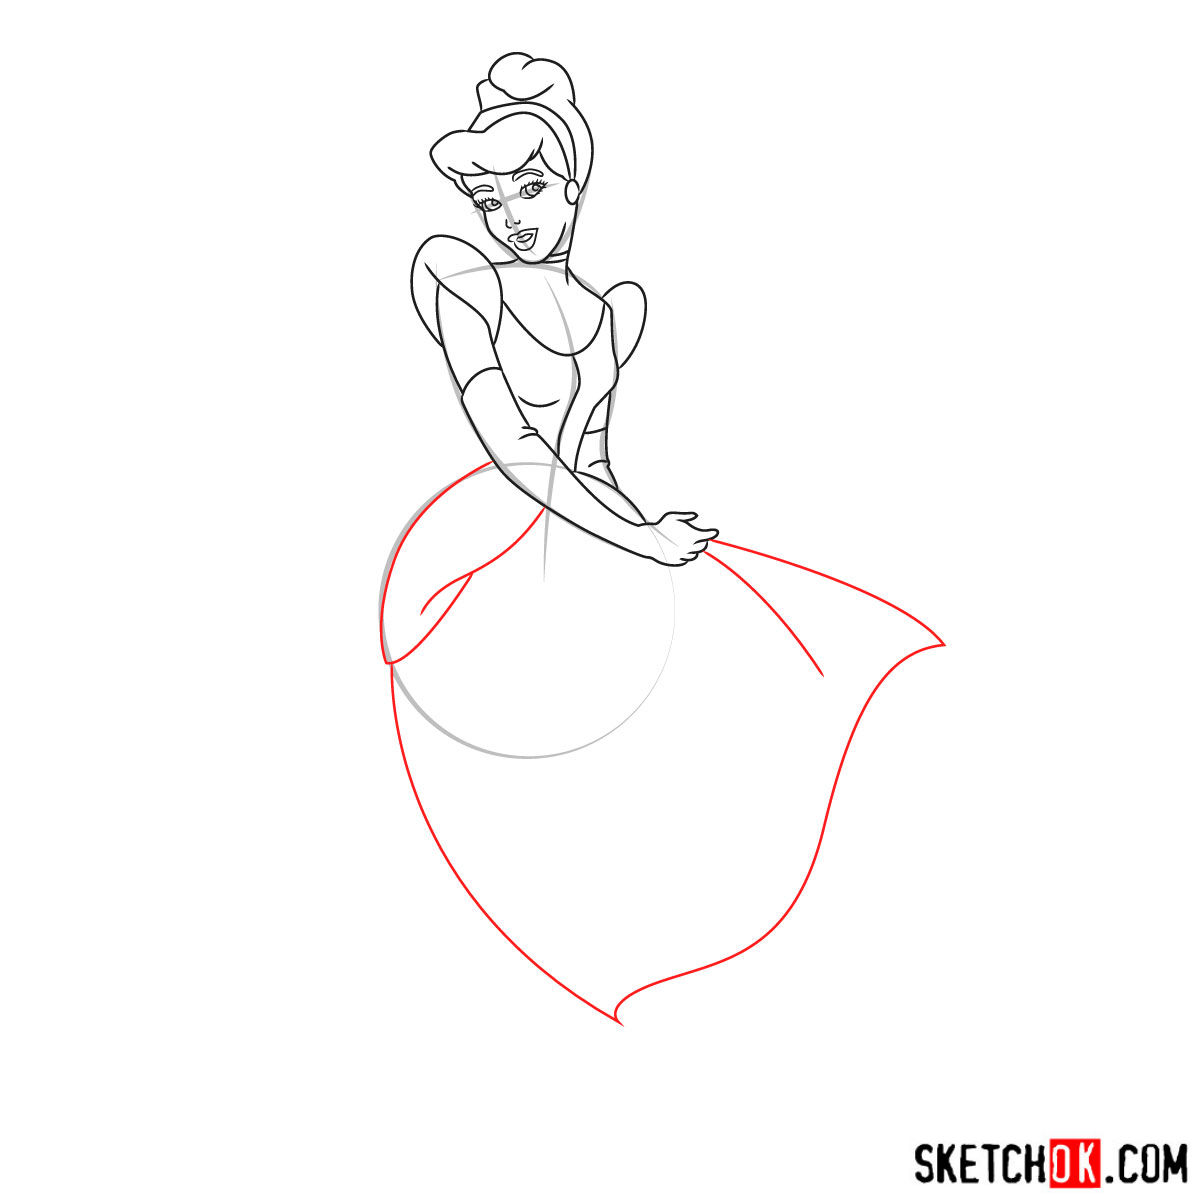 How to draw dancing Cinderella - step 10